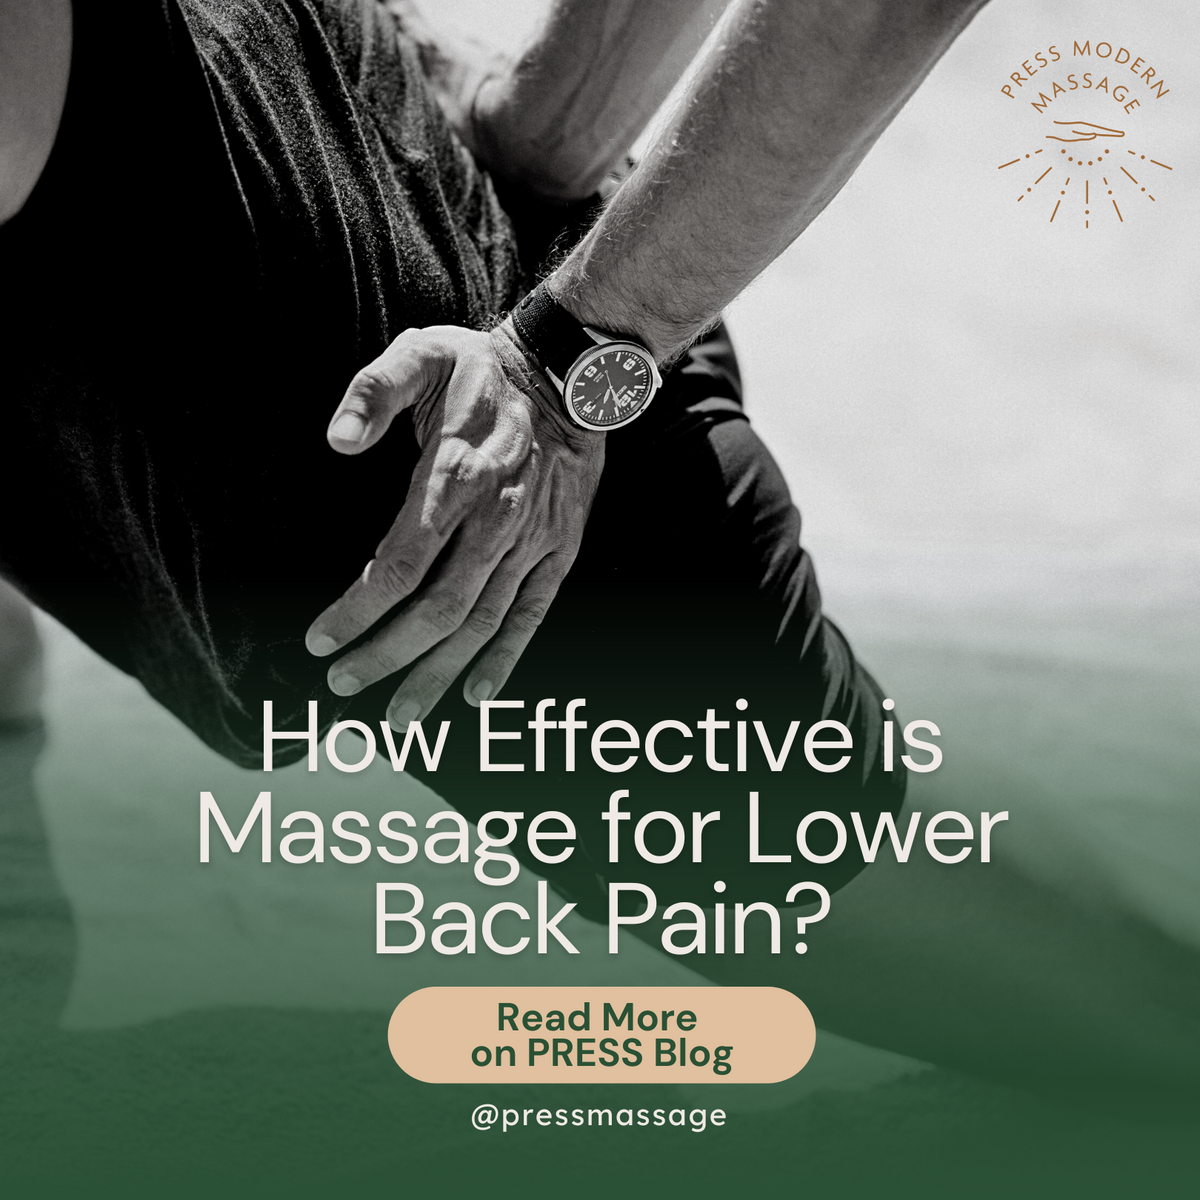 How Effective is Massage for Lower Back Pain